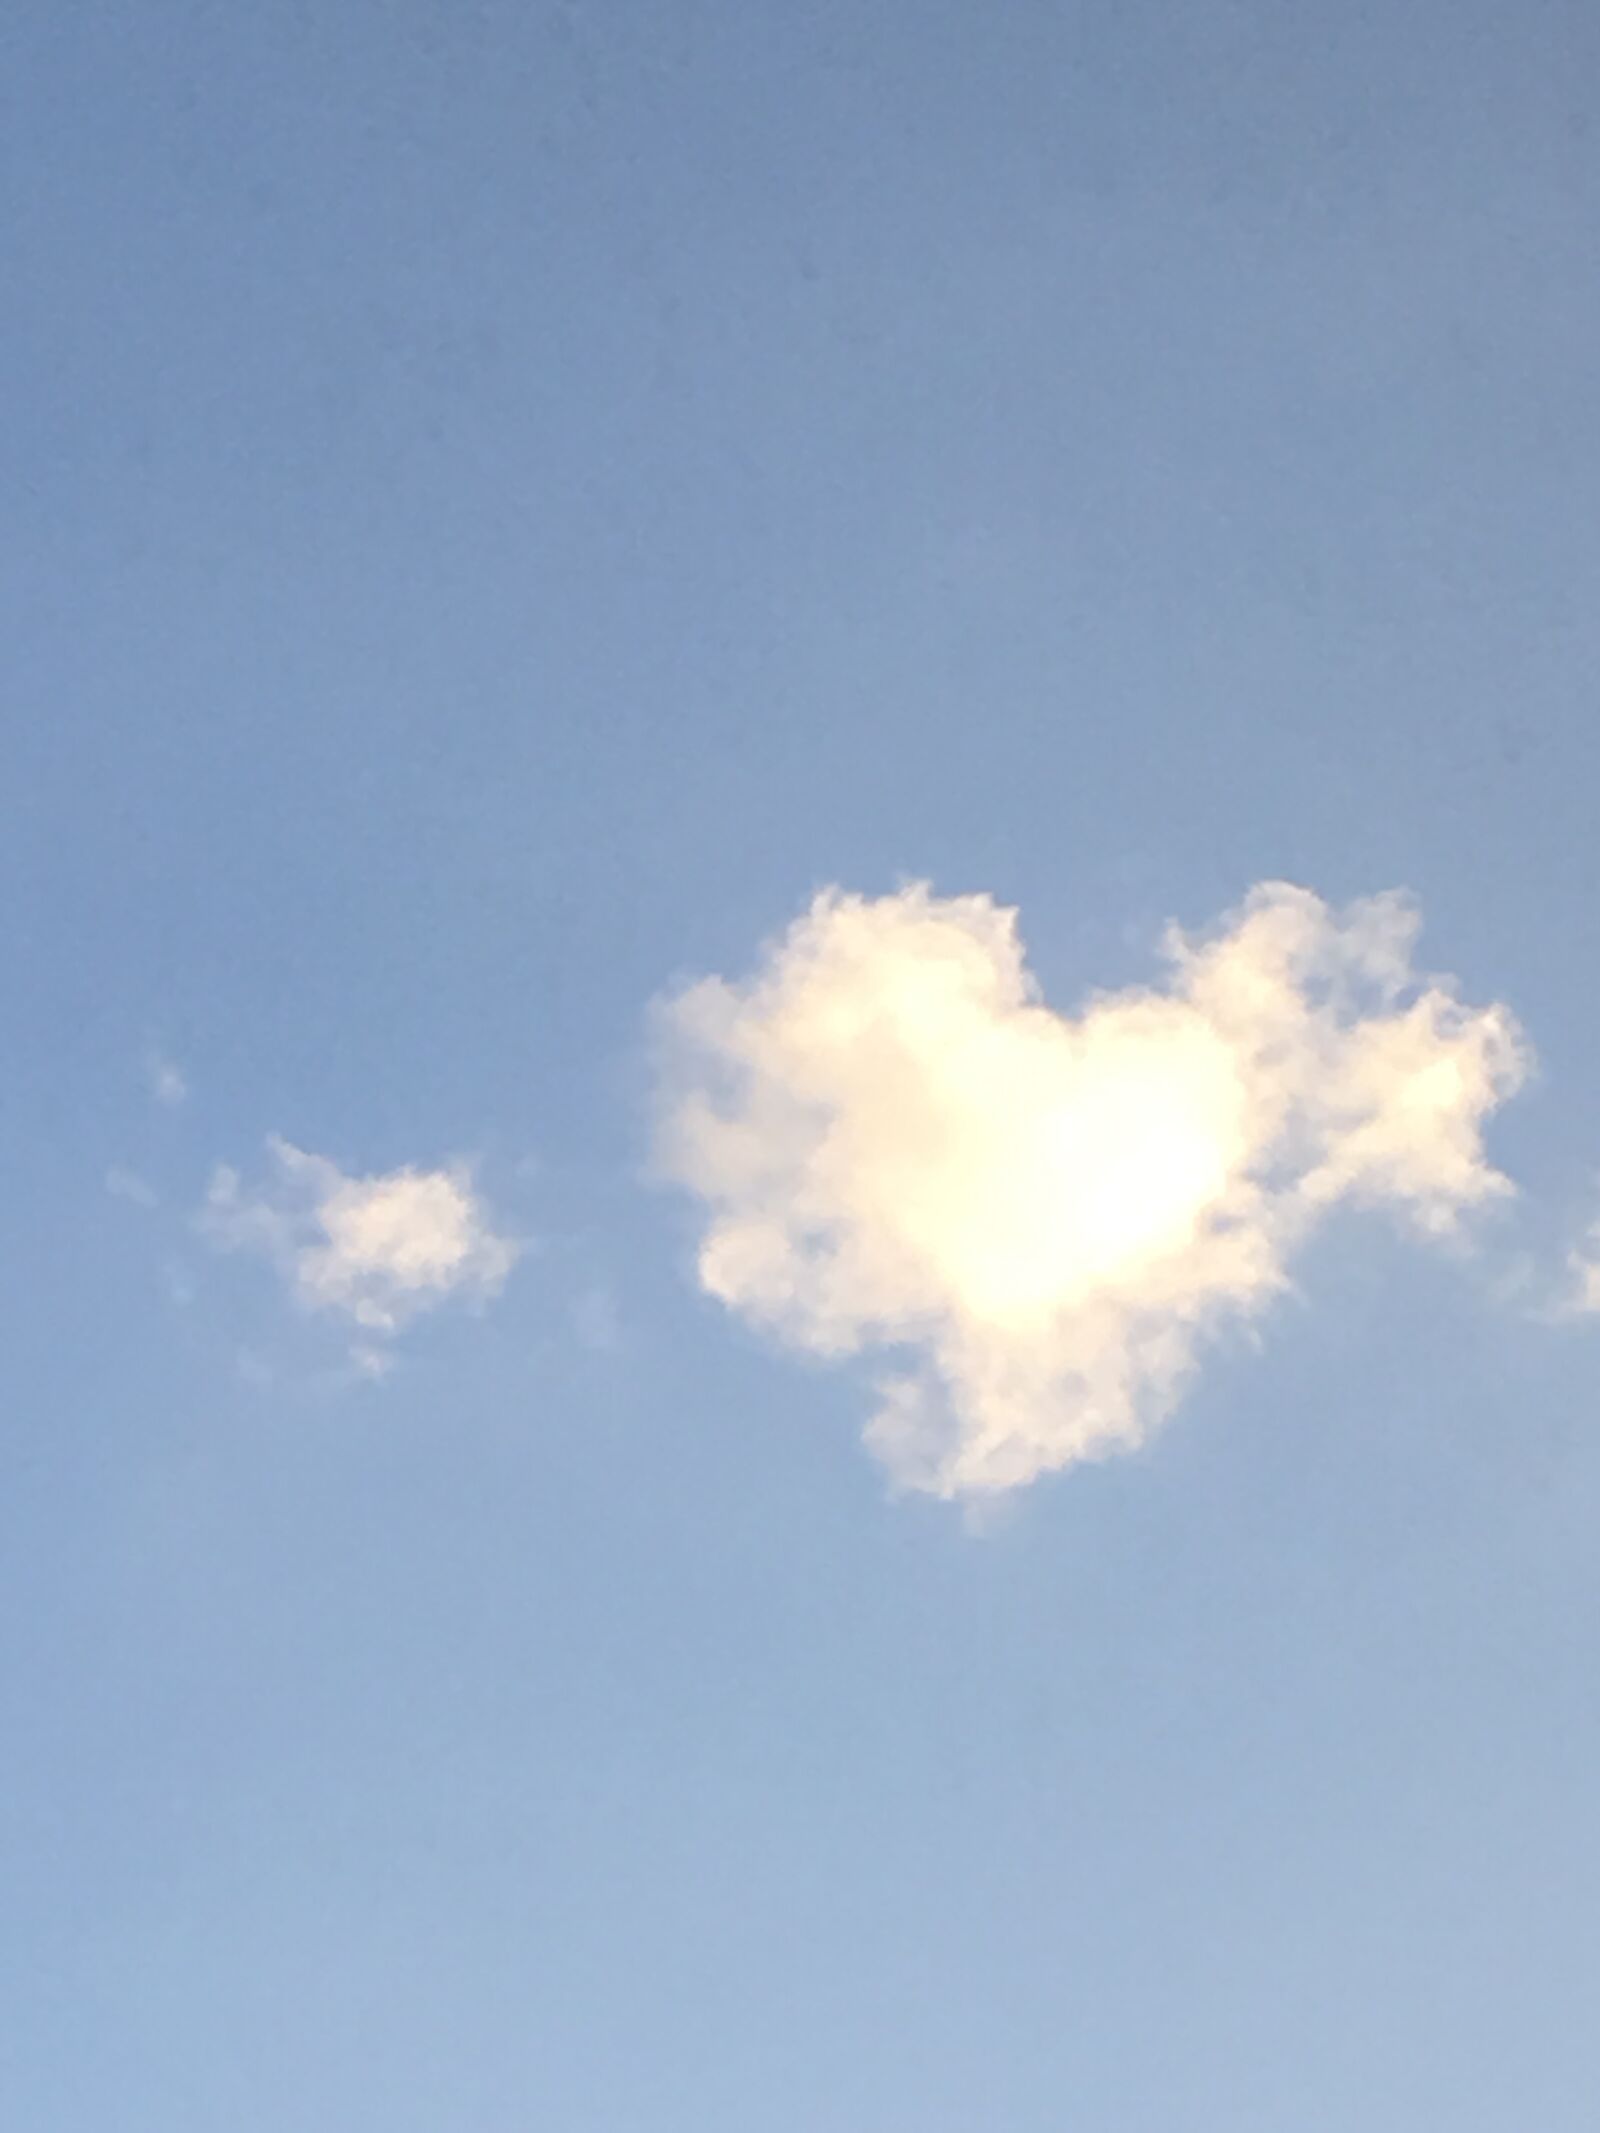 Apple iPhone 6s + iPhone 6s back camera 4.15mm f/2.2 sample photo. Heart, cloud, light photography